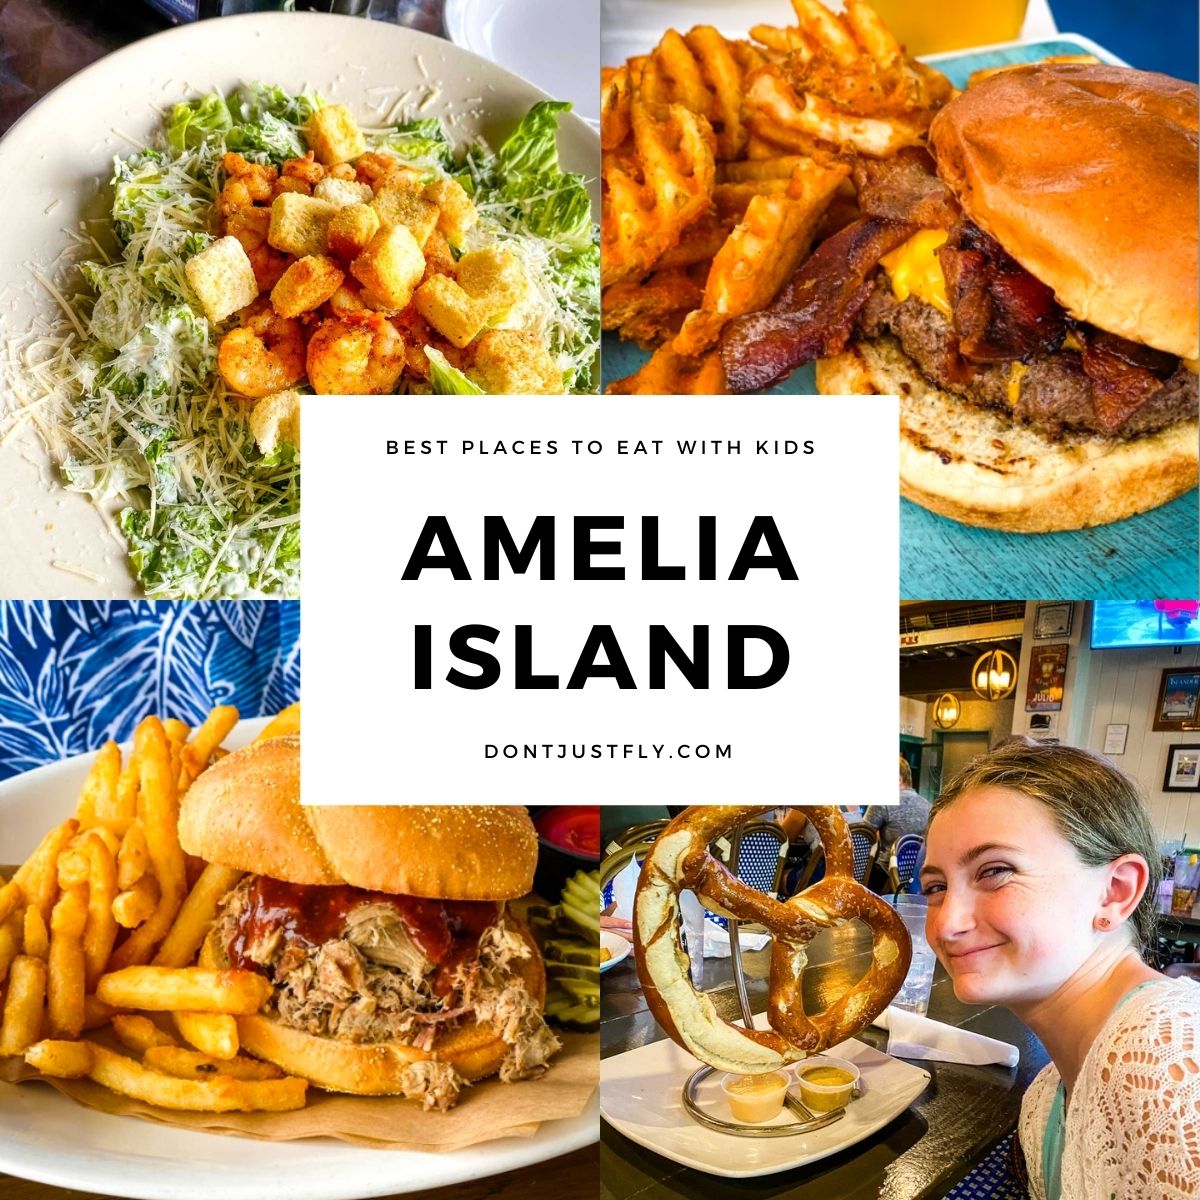 A photo collage shows several restaurants in Amelia Island.